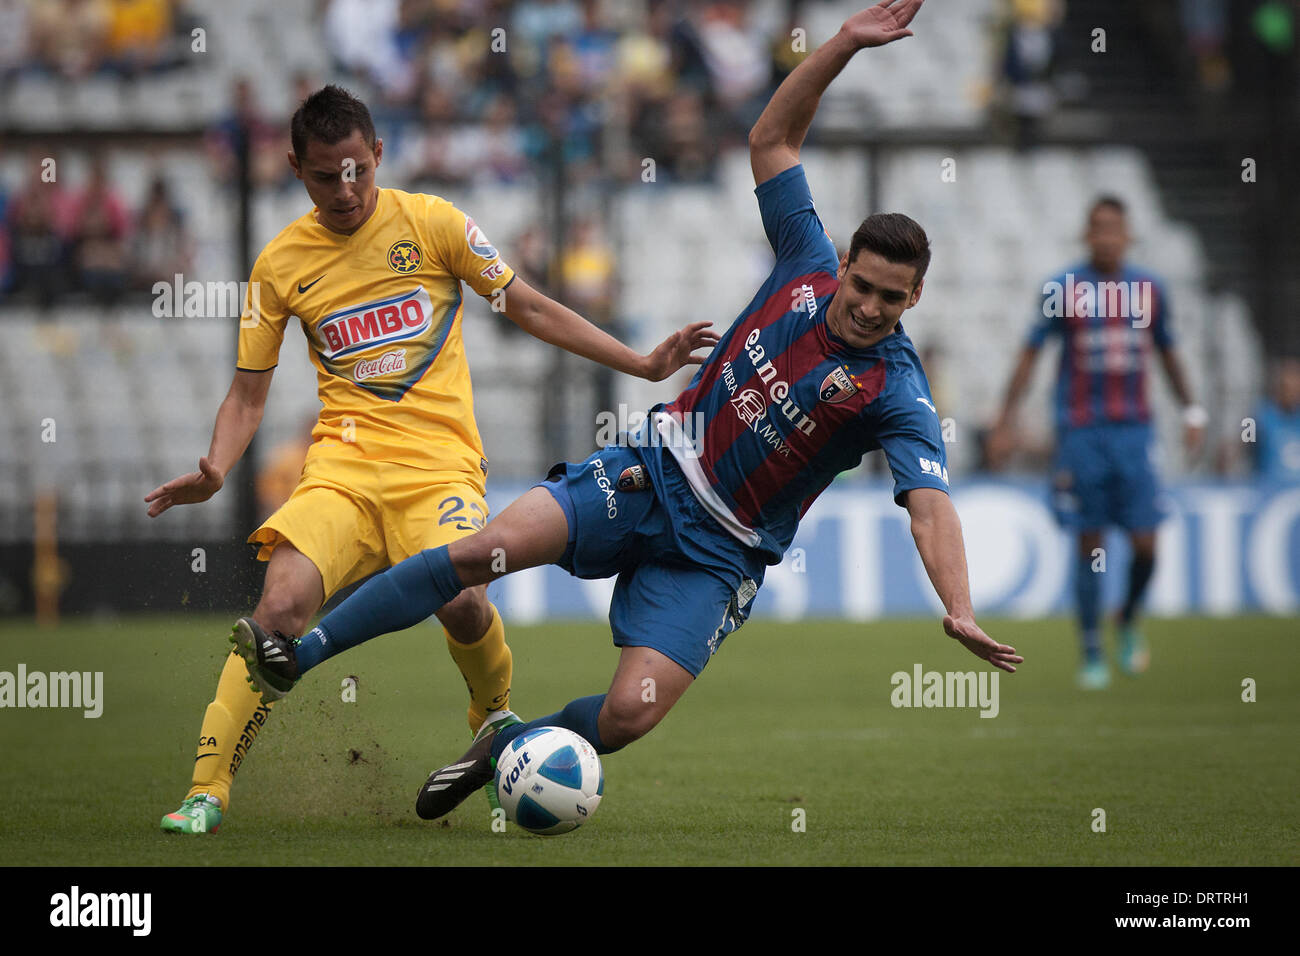 Mexico City, Mexico. 1st Feb, 2014. America's Paul Aguilar (L) vies for the ball with Atlante's Manuel Viniegra (R) during the match of the MX League Closing Tournament 2014, held in the Azteca Stadium in Mexico City, capital of Mexico, on Feb. 1, 2014. Credit:  Pedro Mera/Xinhua/Alamy Live News Stock Photo